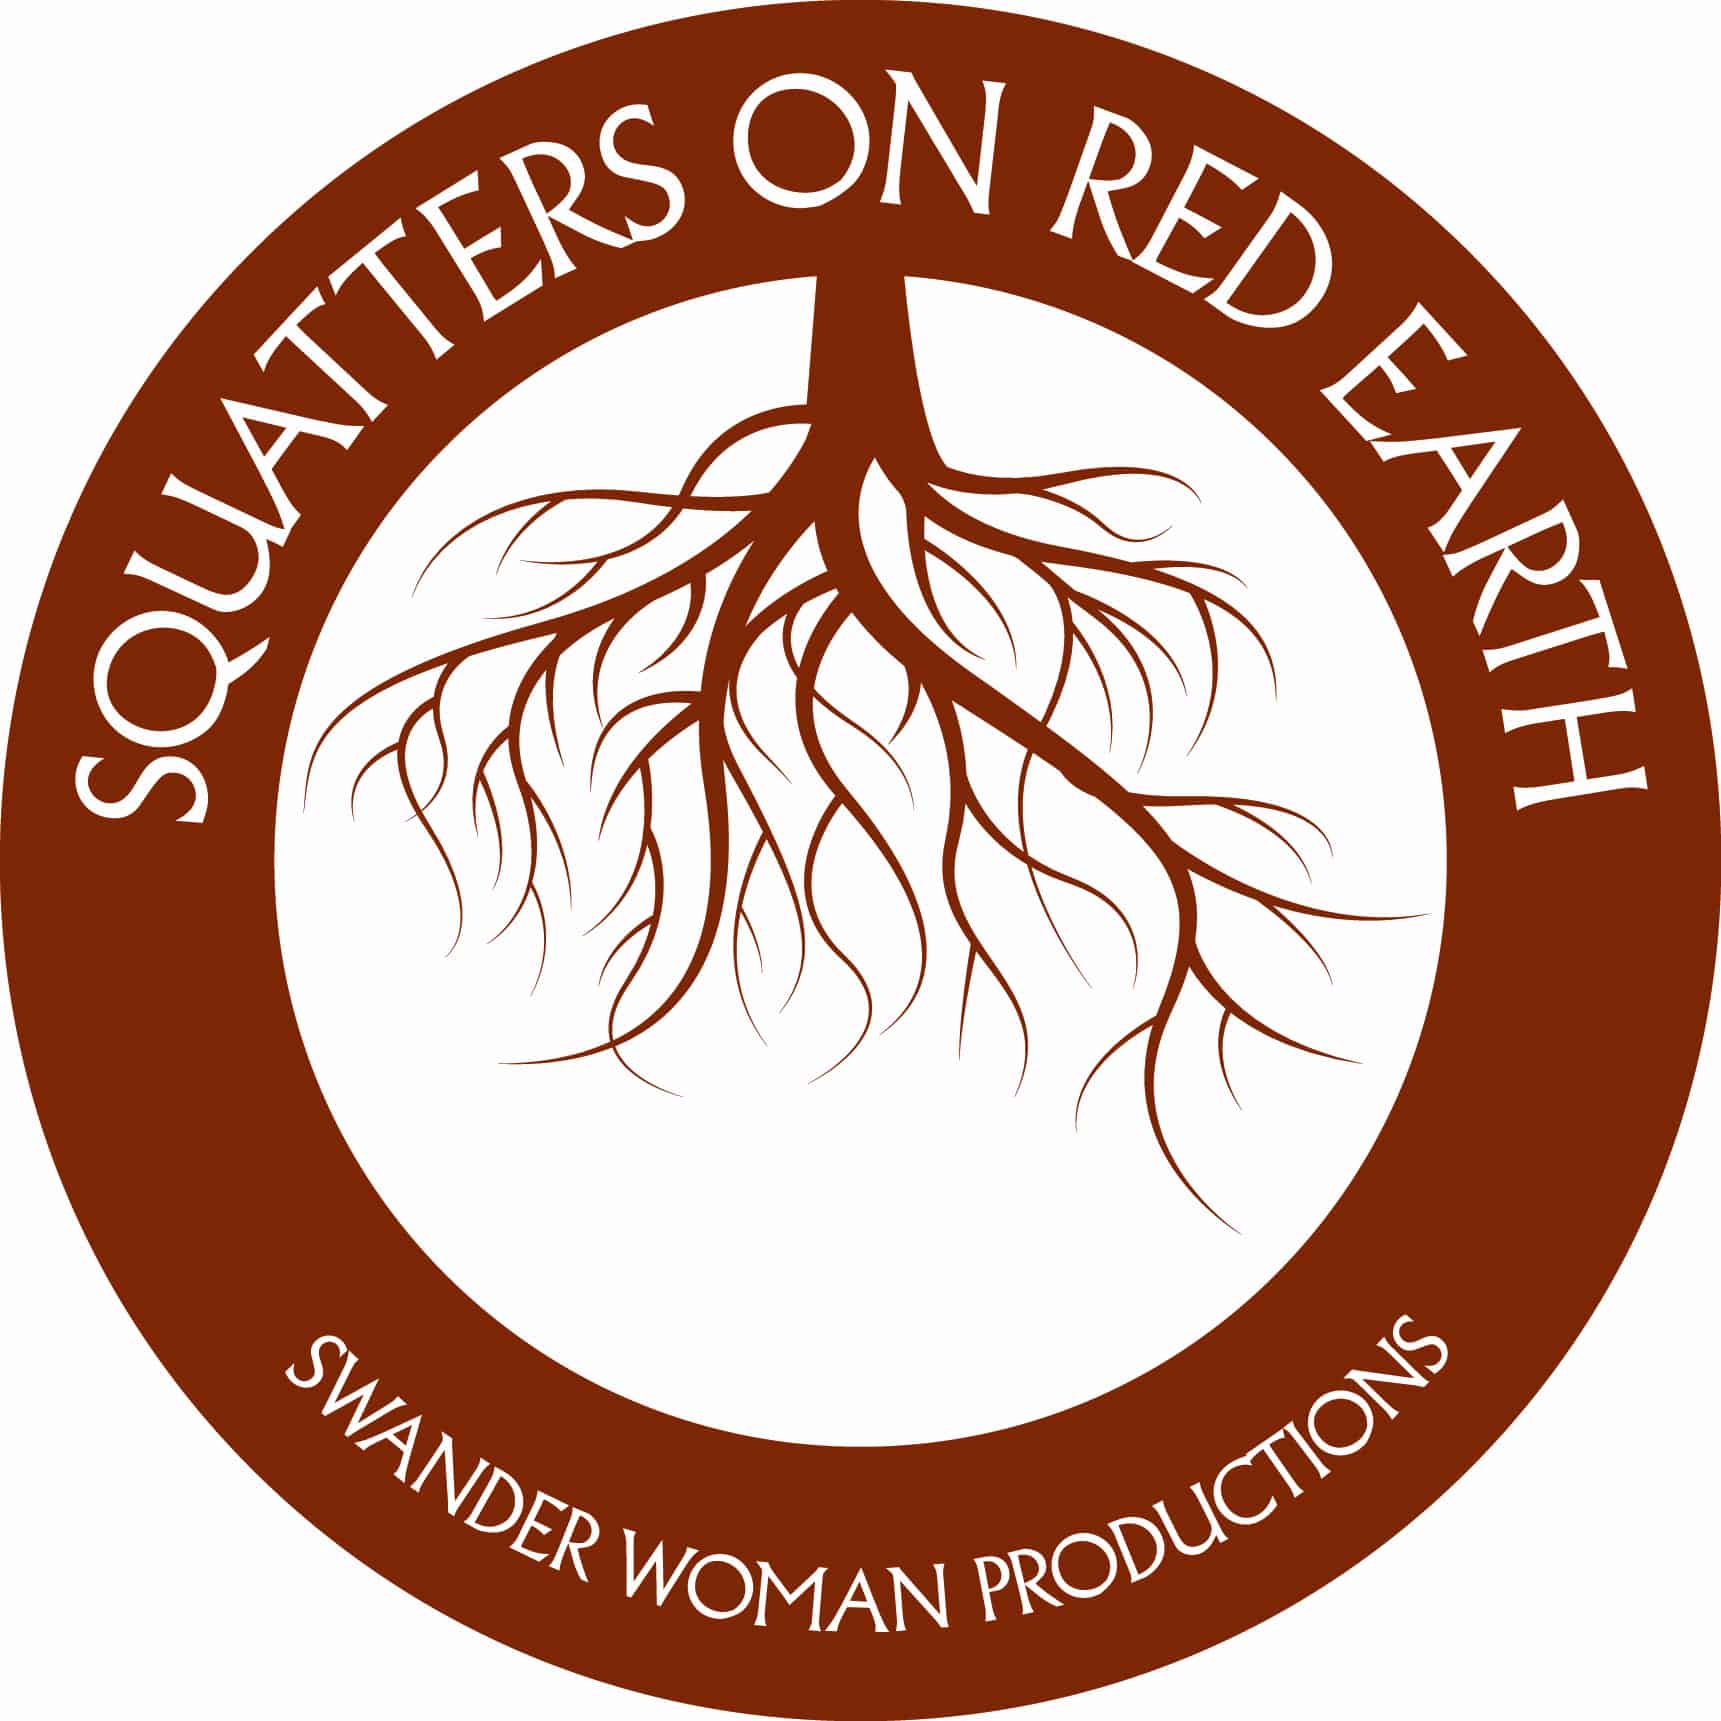 Squatters on Red Earth